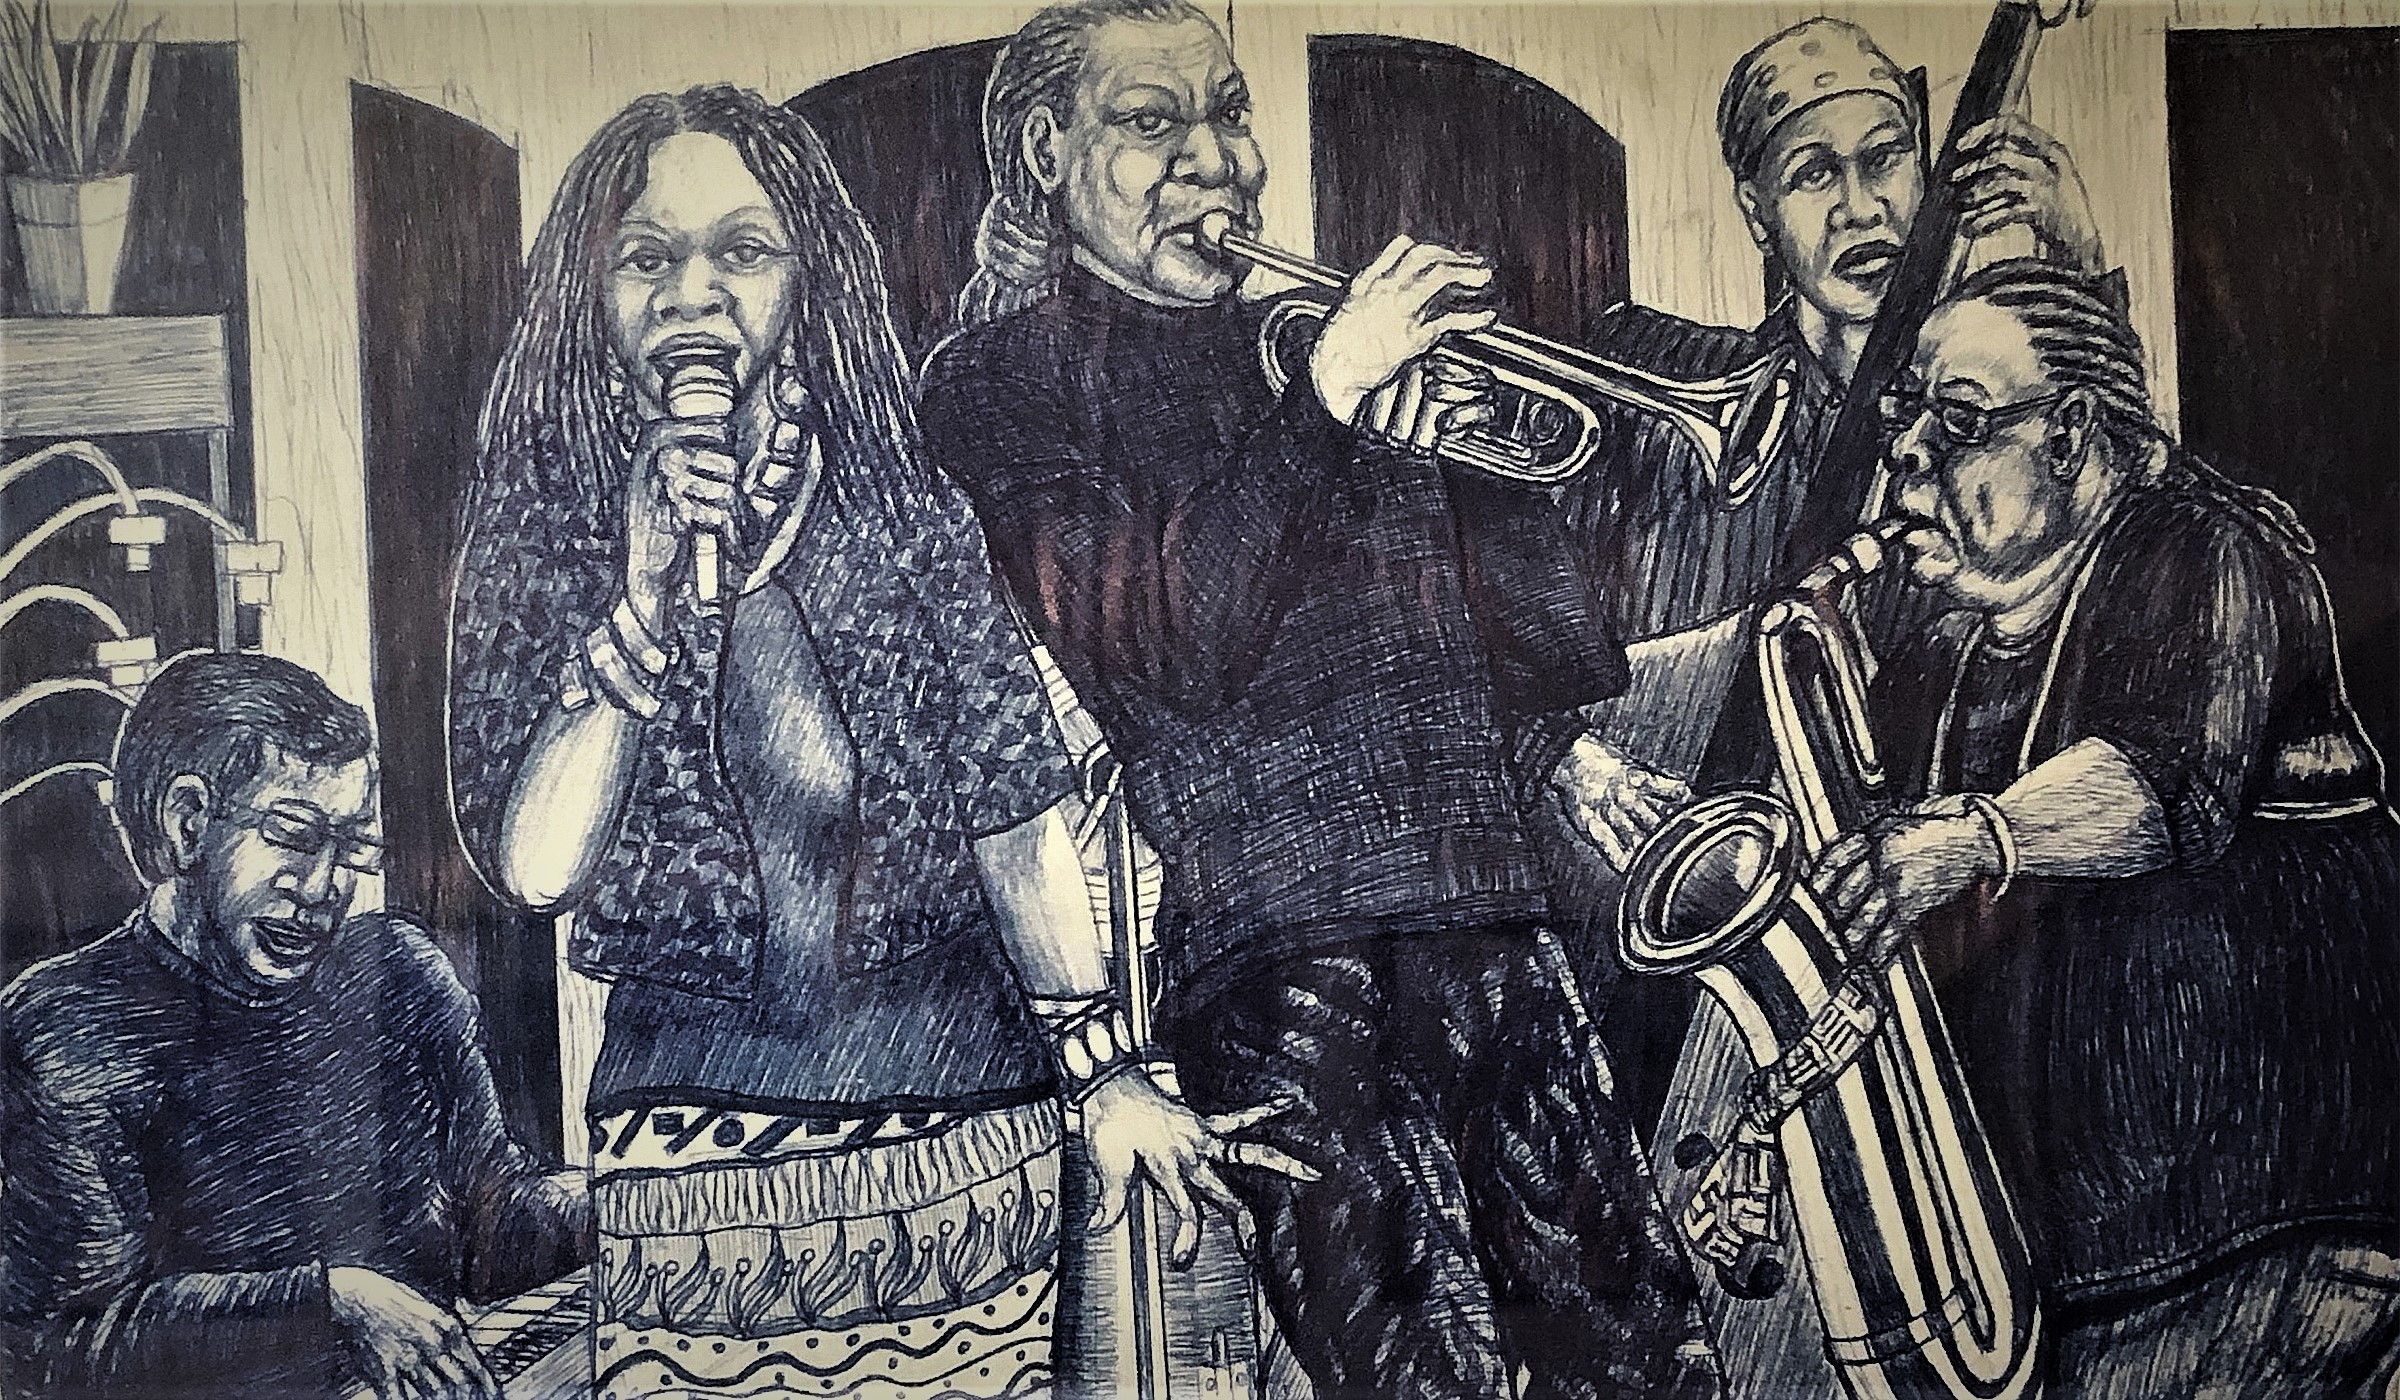 Drawing of Monique with band